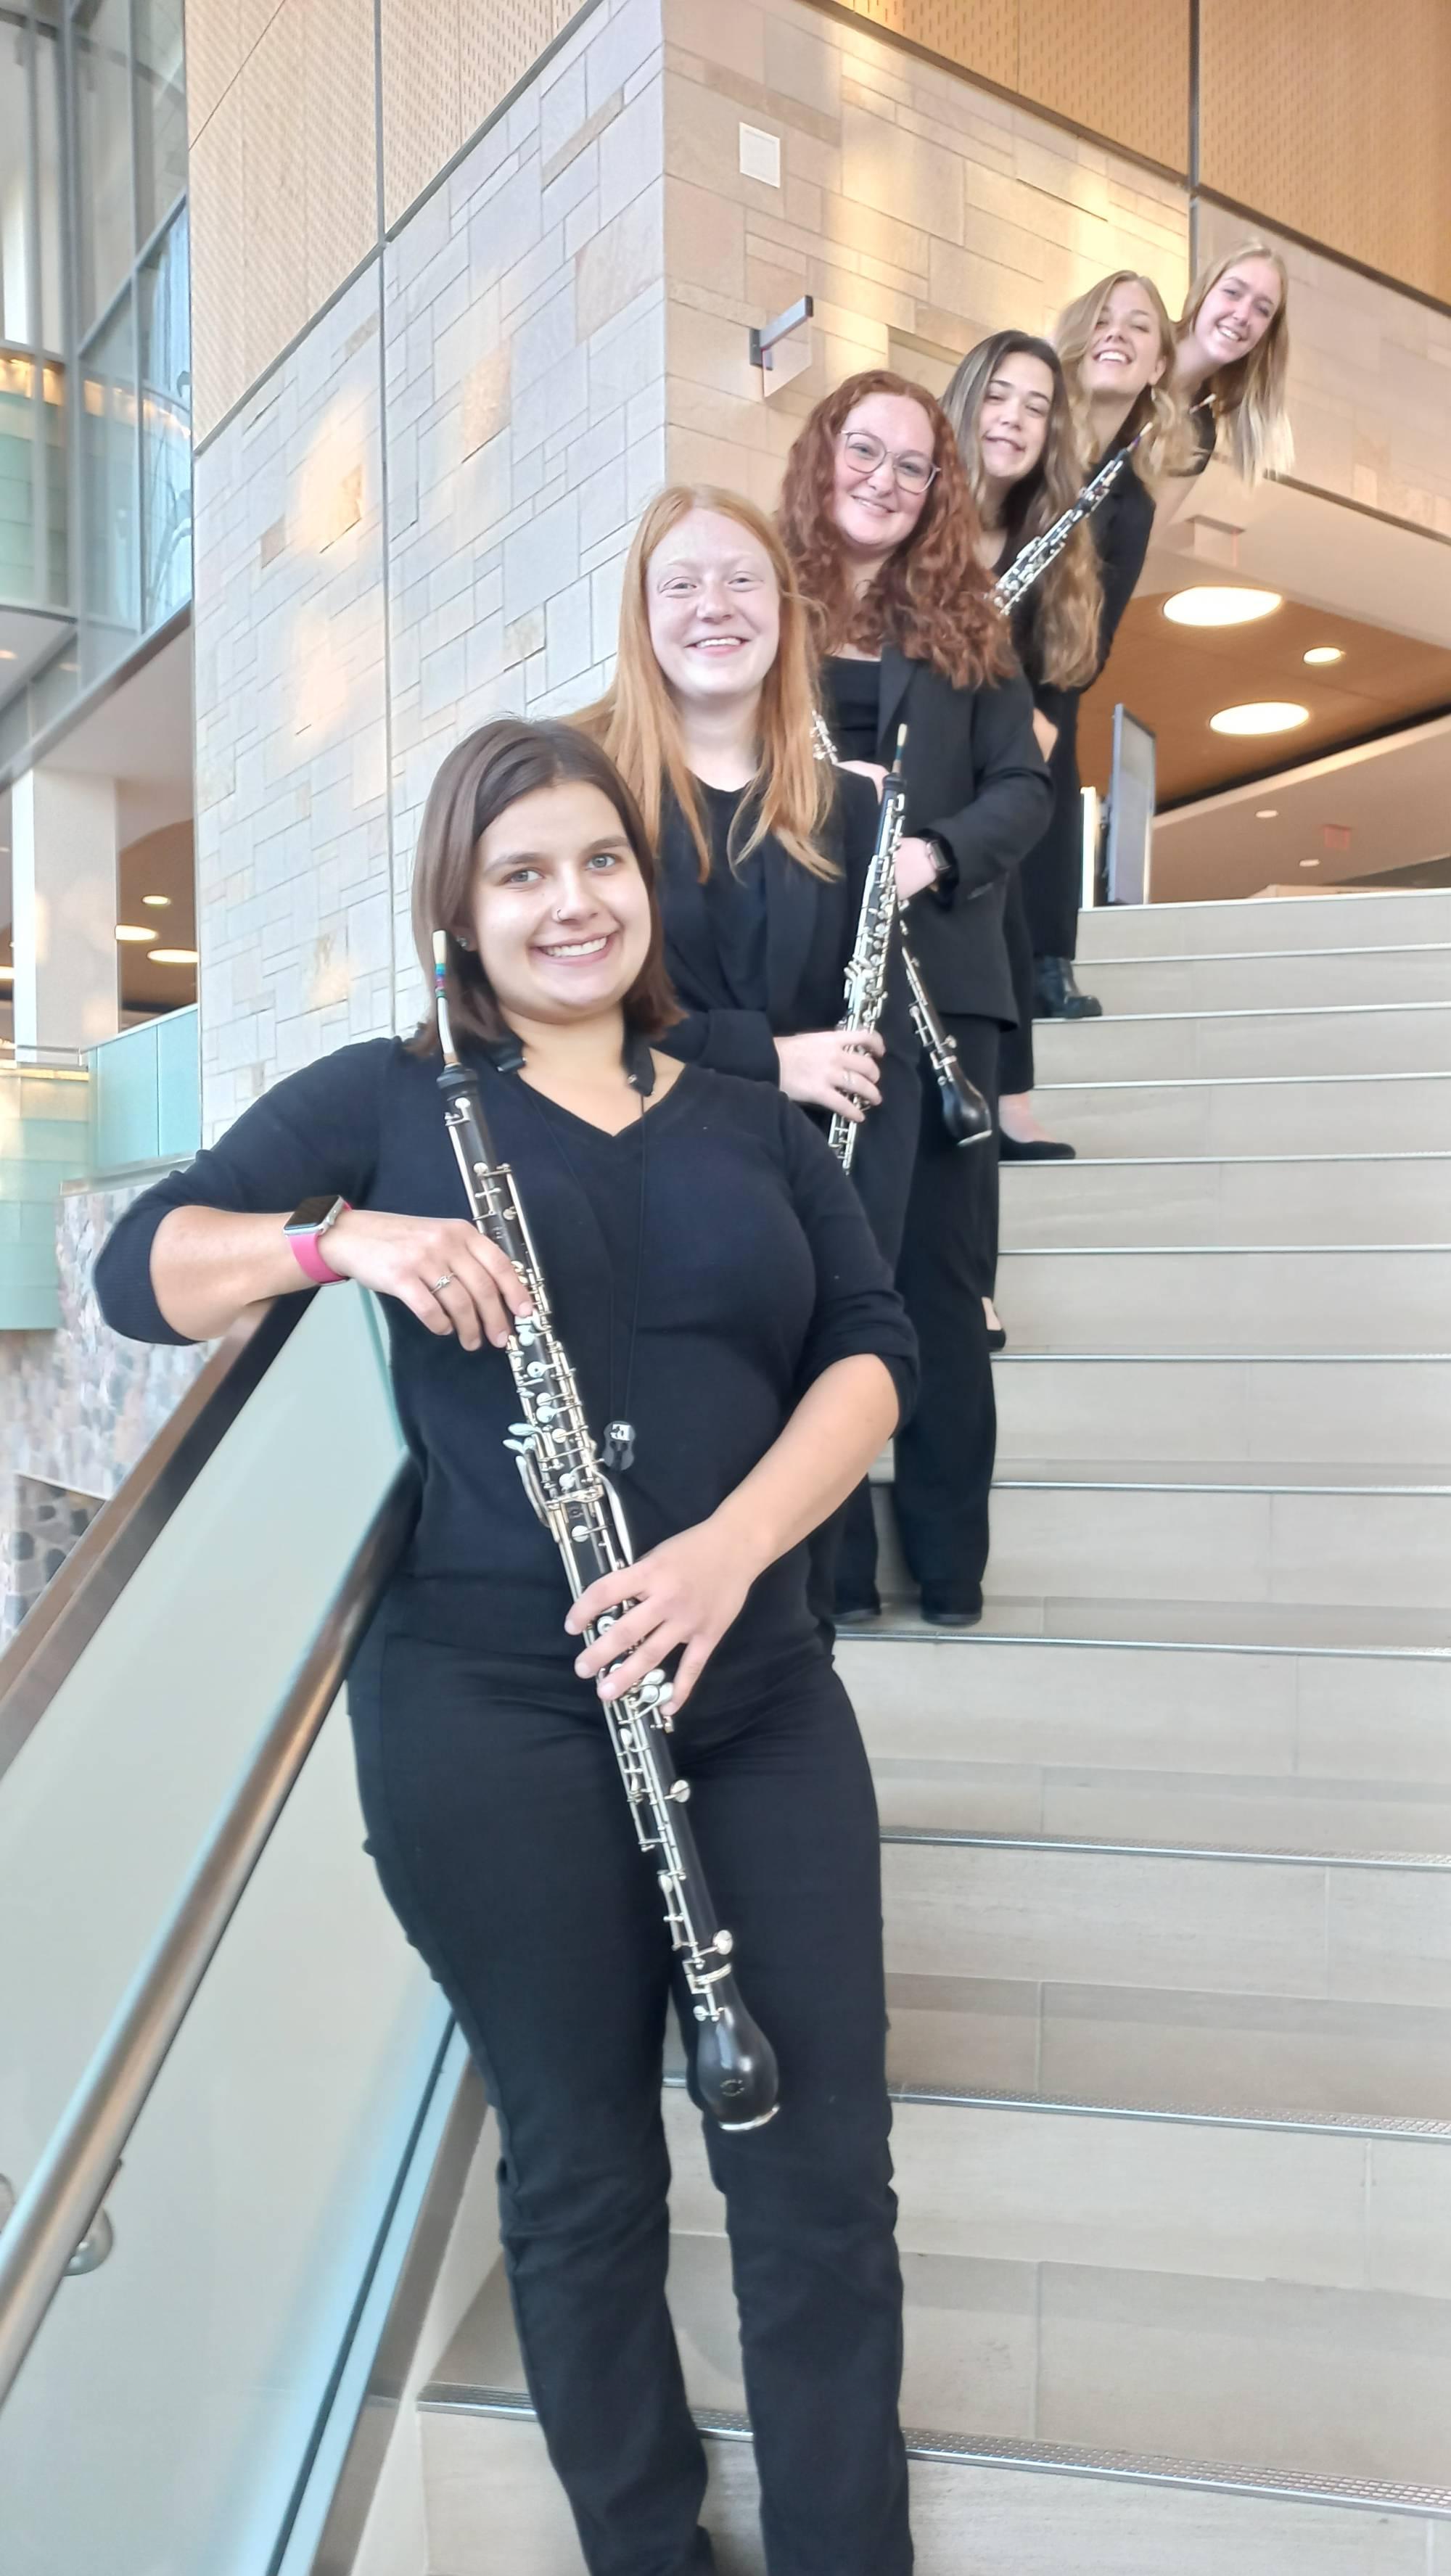 A group of GVSU oboists standing on stairs at the GVSU library.